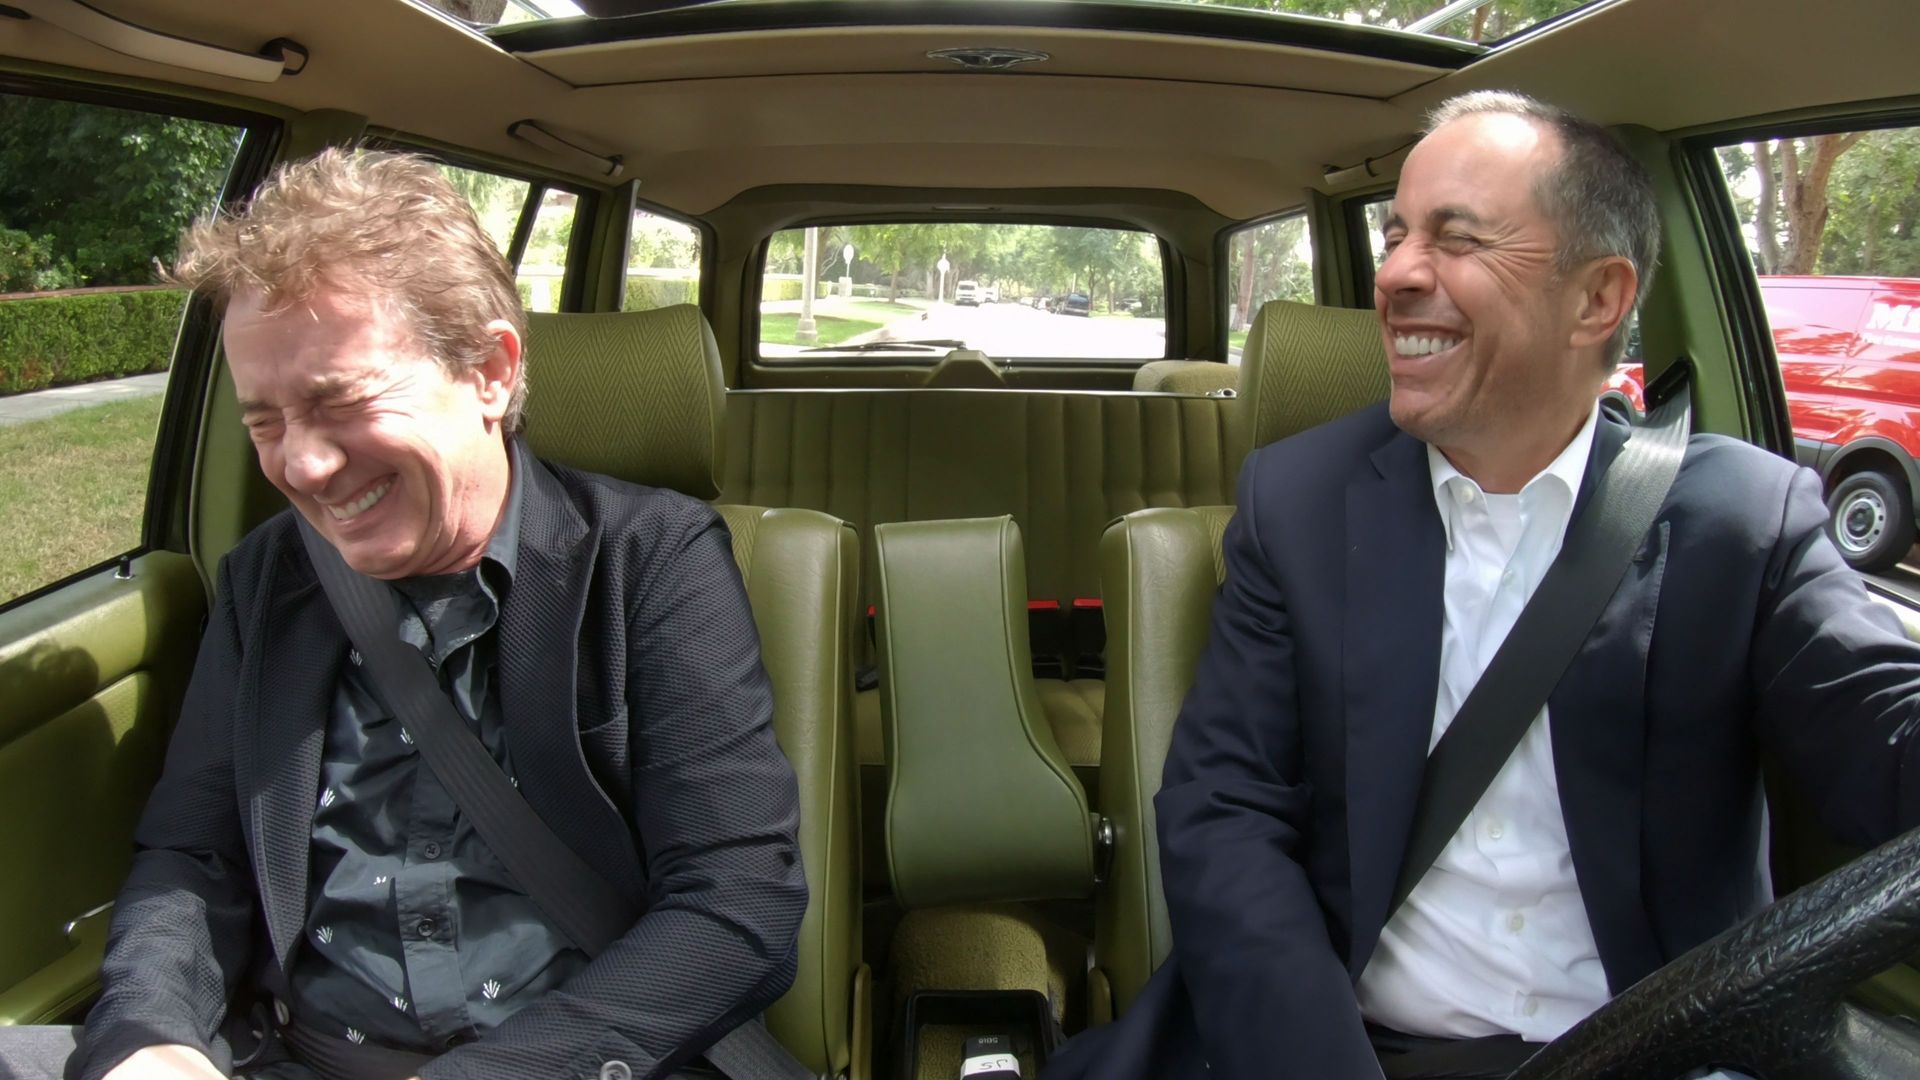 Comedians in Cars Getting Coffee background